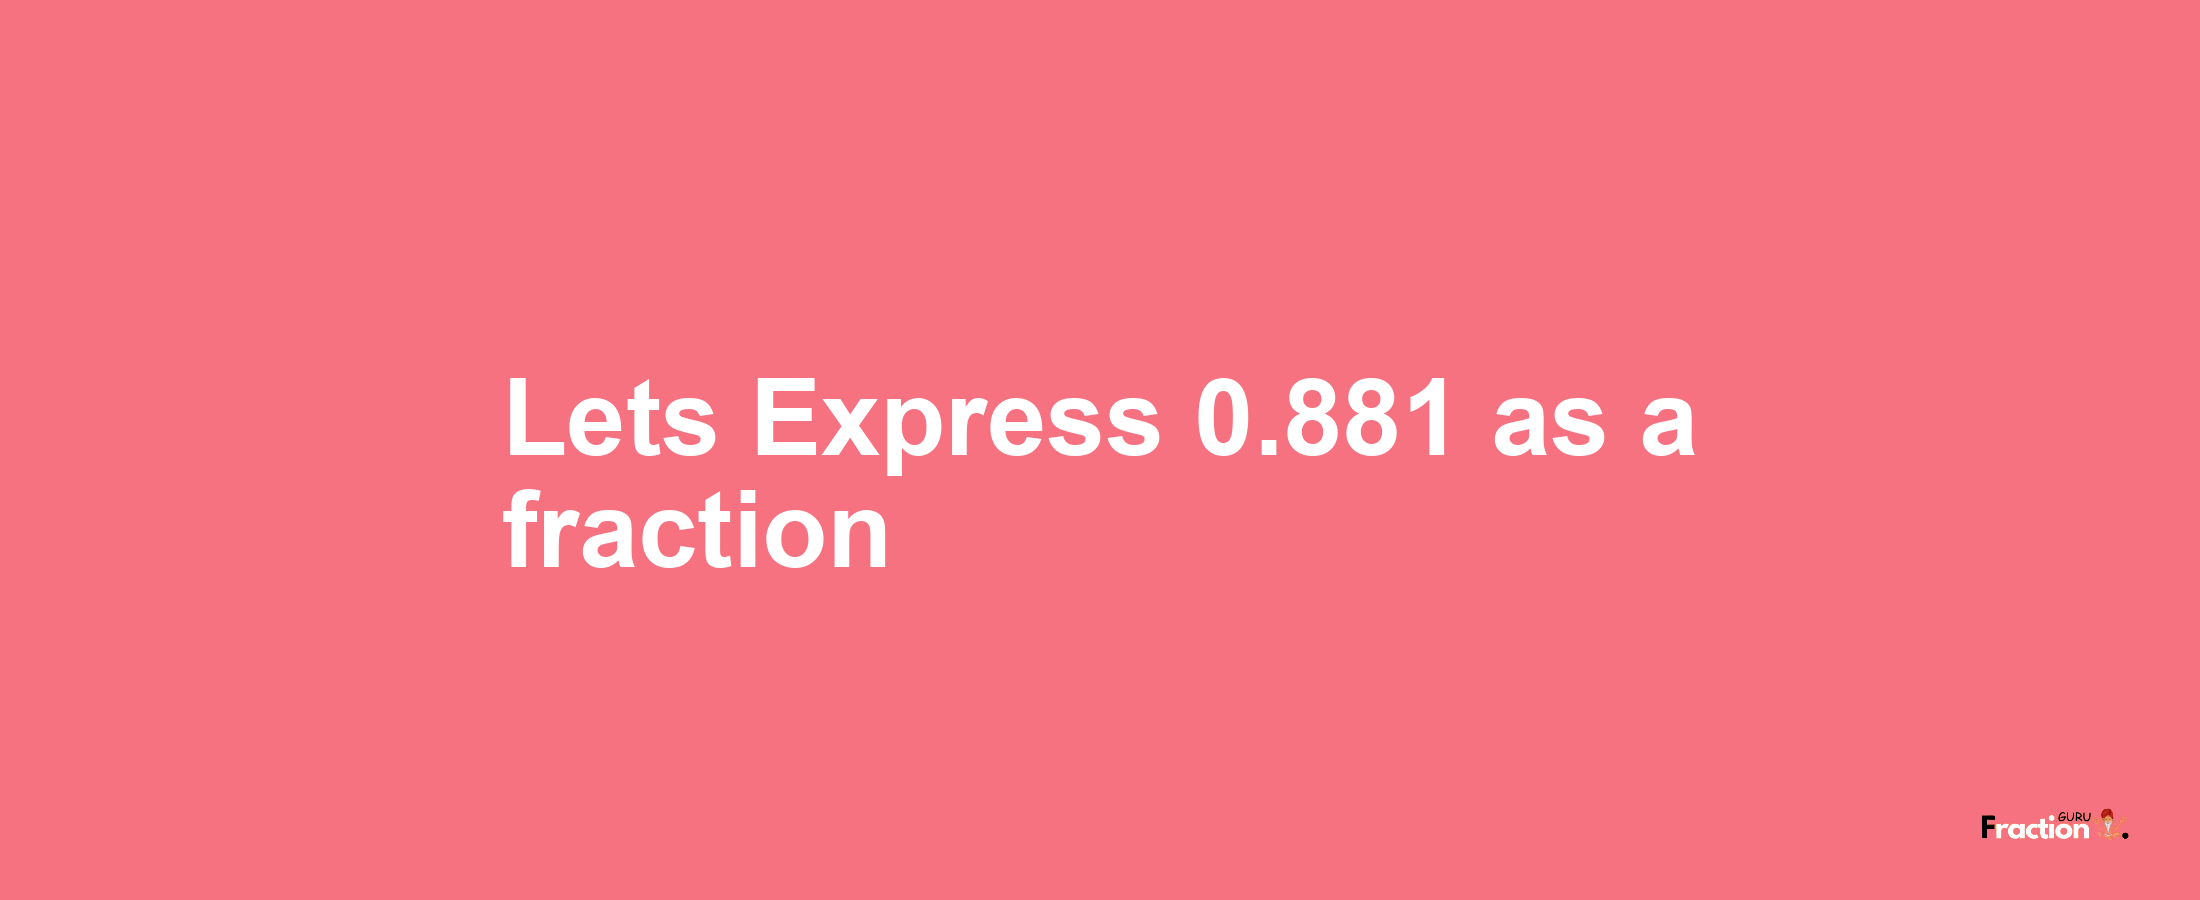 Lets Express 0.881 as afraction